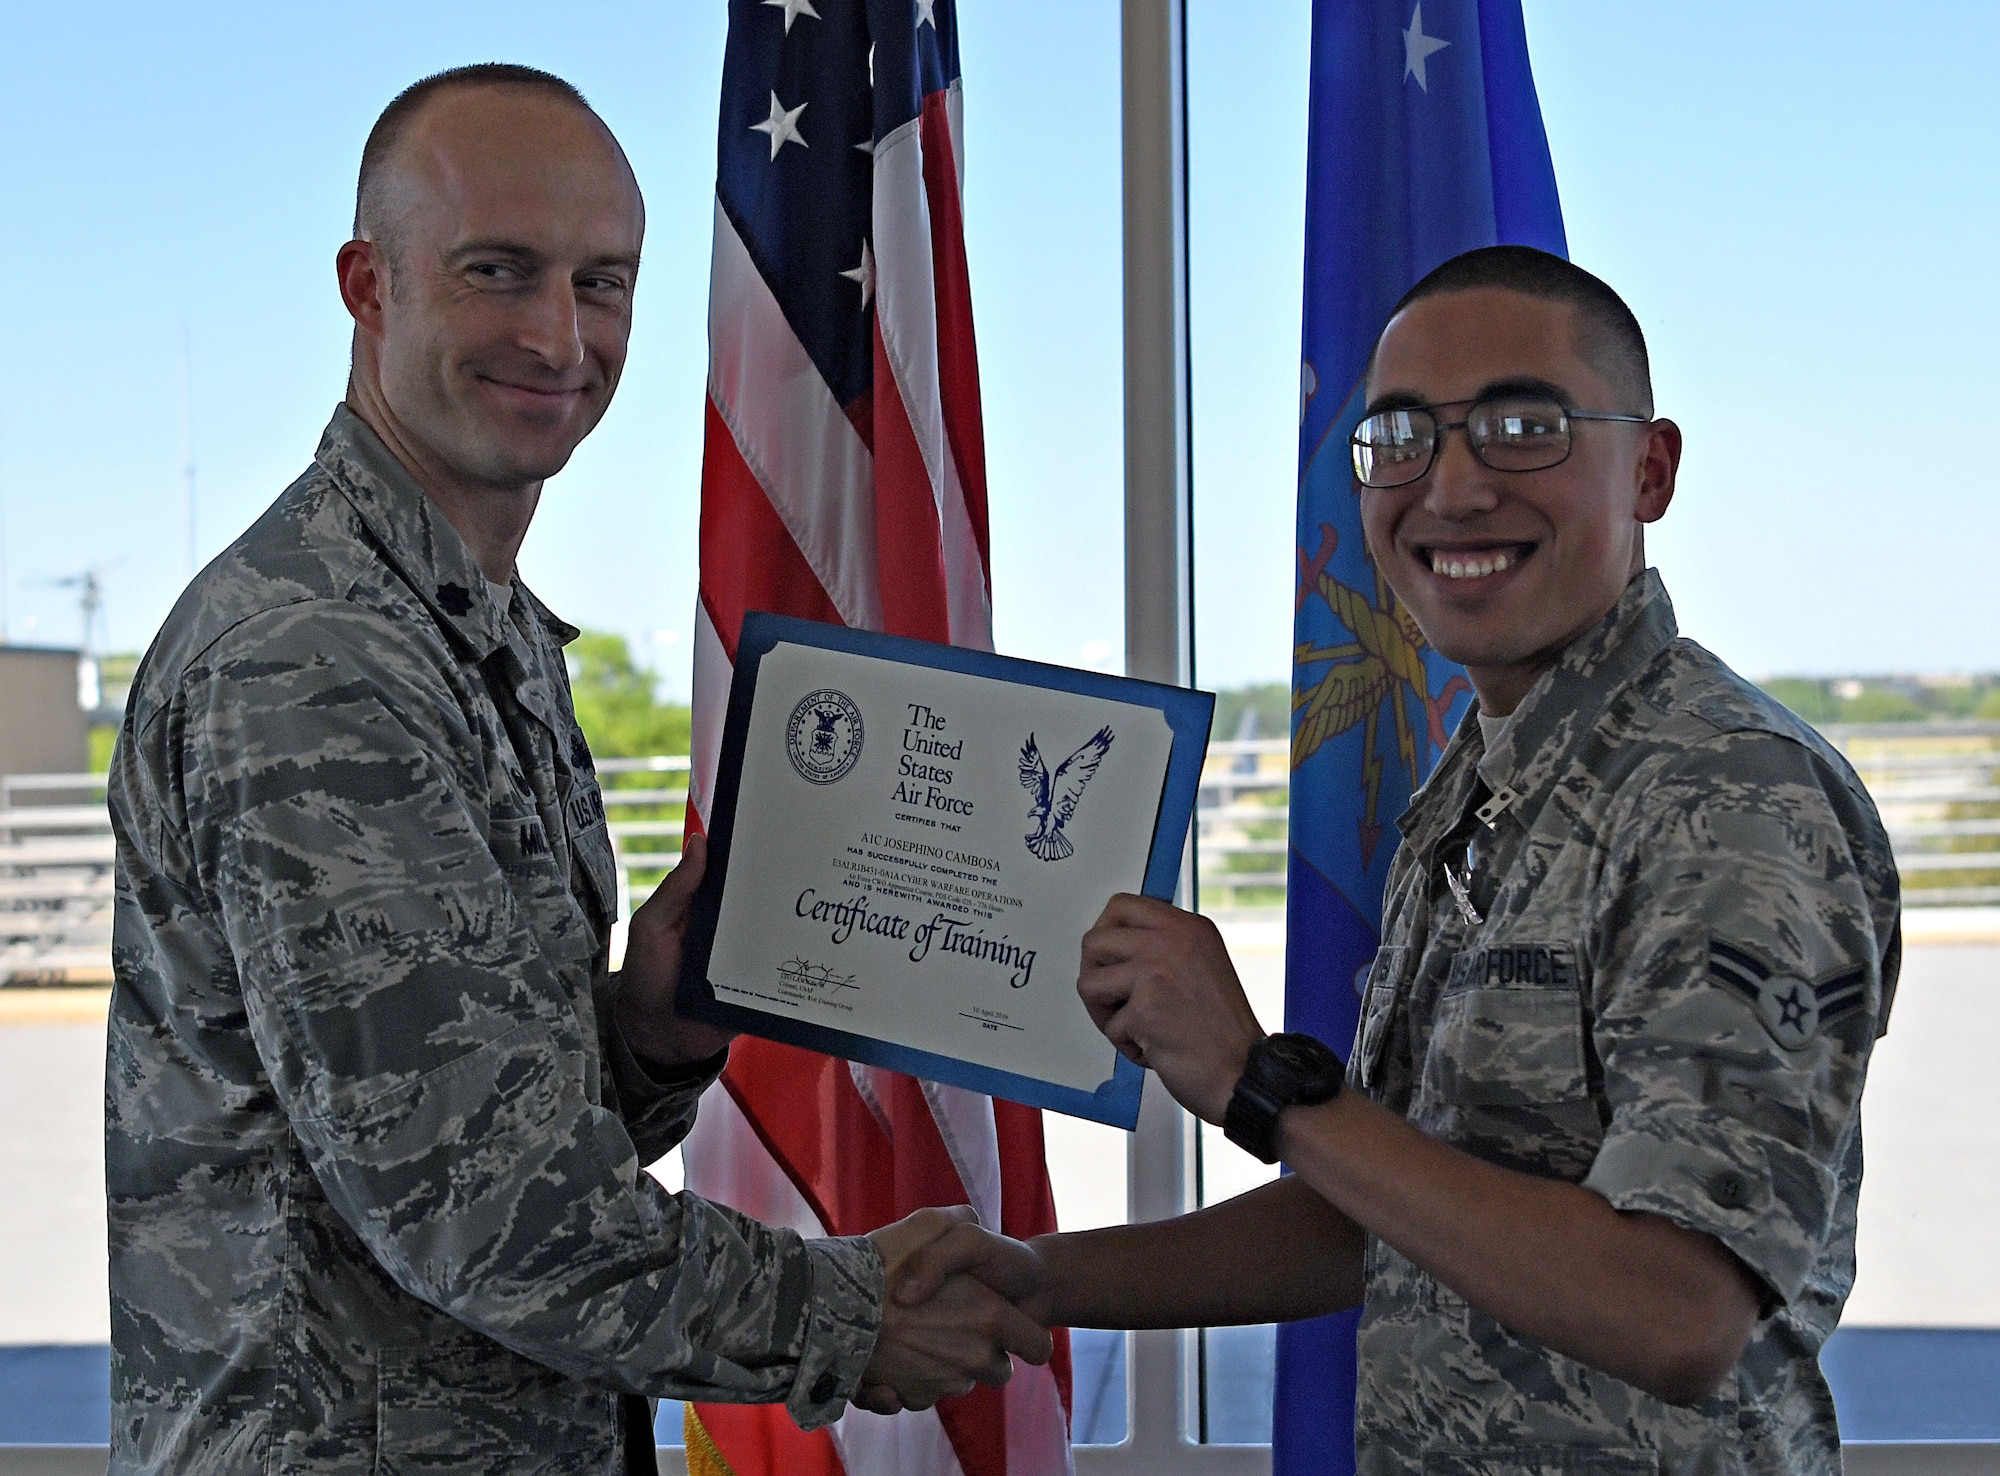 Lt. Col. Andrew Miller, 333rd Training Squadron commander, awards Airman 1st Class Josephino Cambosa, 333rd TRS student, a certificate of training for completing the Cyber Warfare Operations course on Keesler Air Force Base, Mississippi, April 10, 2019. Cambosa is the first non-prior service Airman to graduate from the Cyber Warfare Operations school house. (U.S. Air Force photo by 2nd Lt. Anh T. Bui)